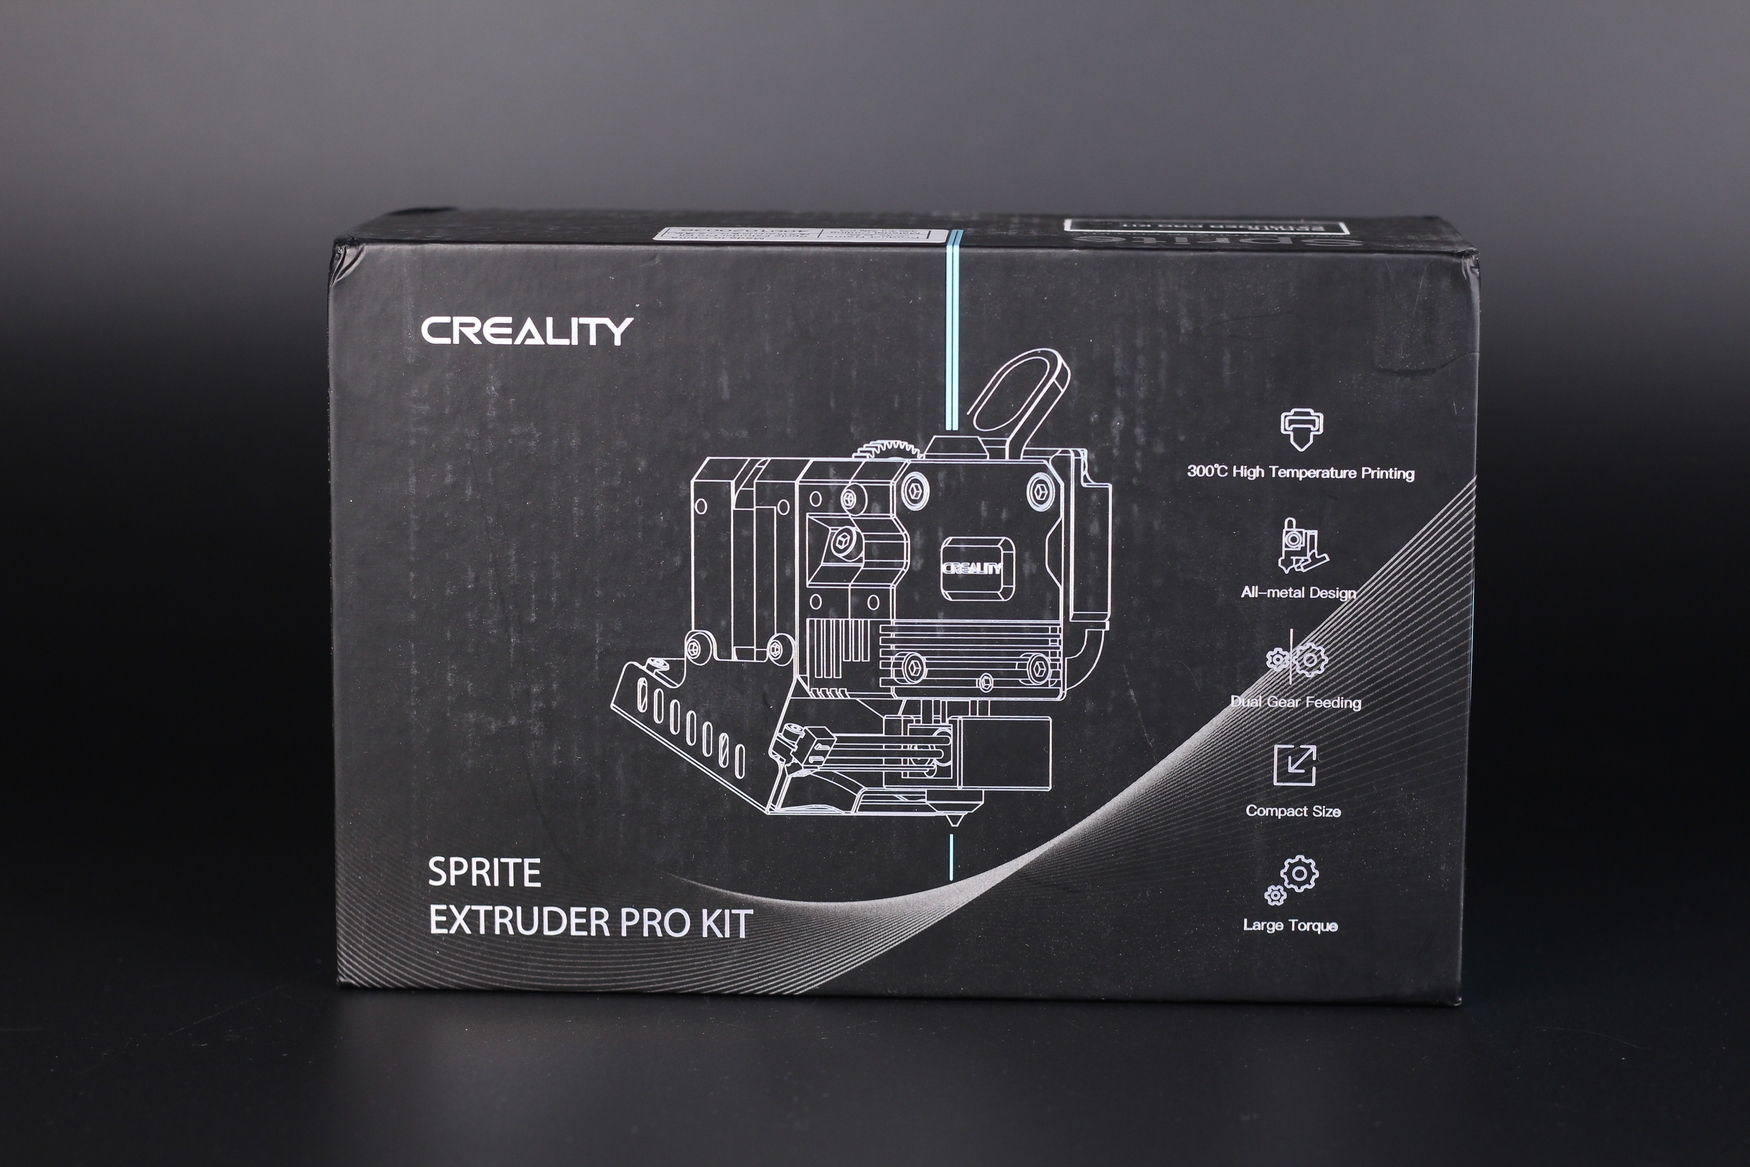 Sprite Pro Extruder Review Packaging1 | Creality Sprite Pro Extruder Review: Full Upgrade Kit